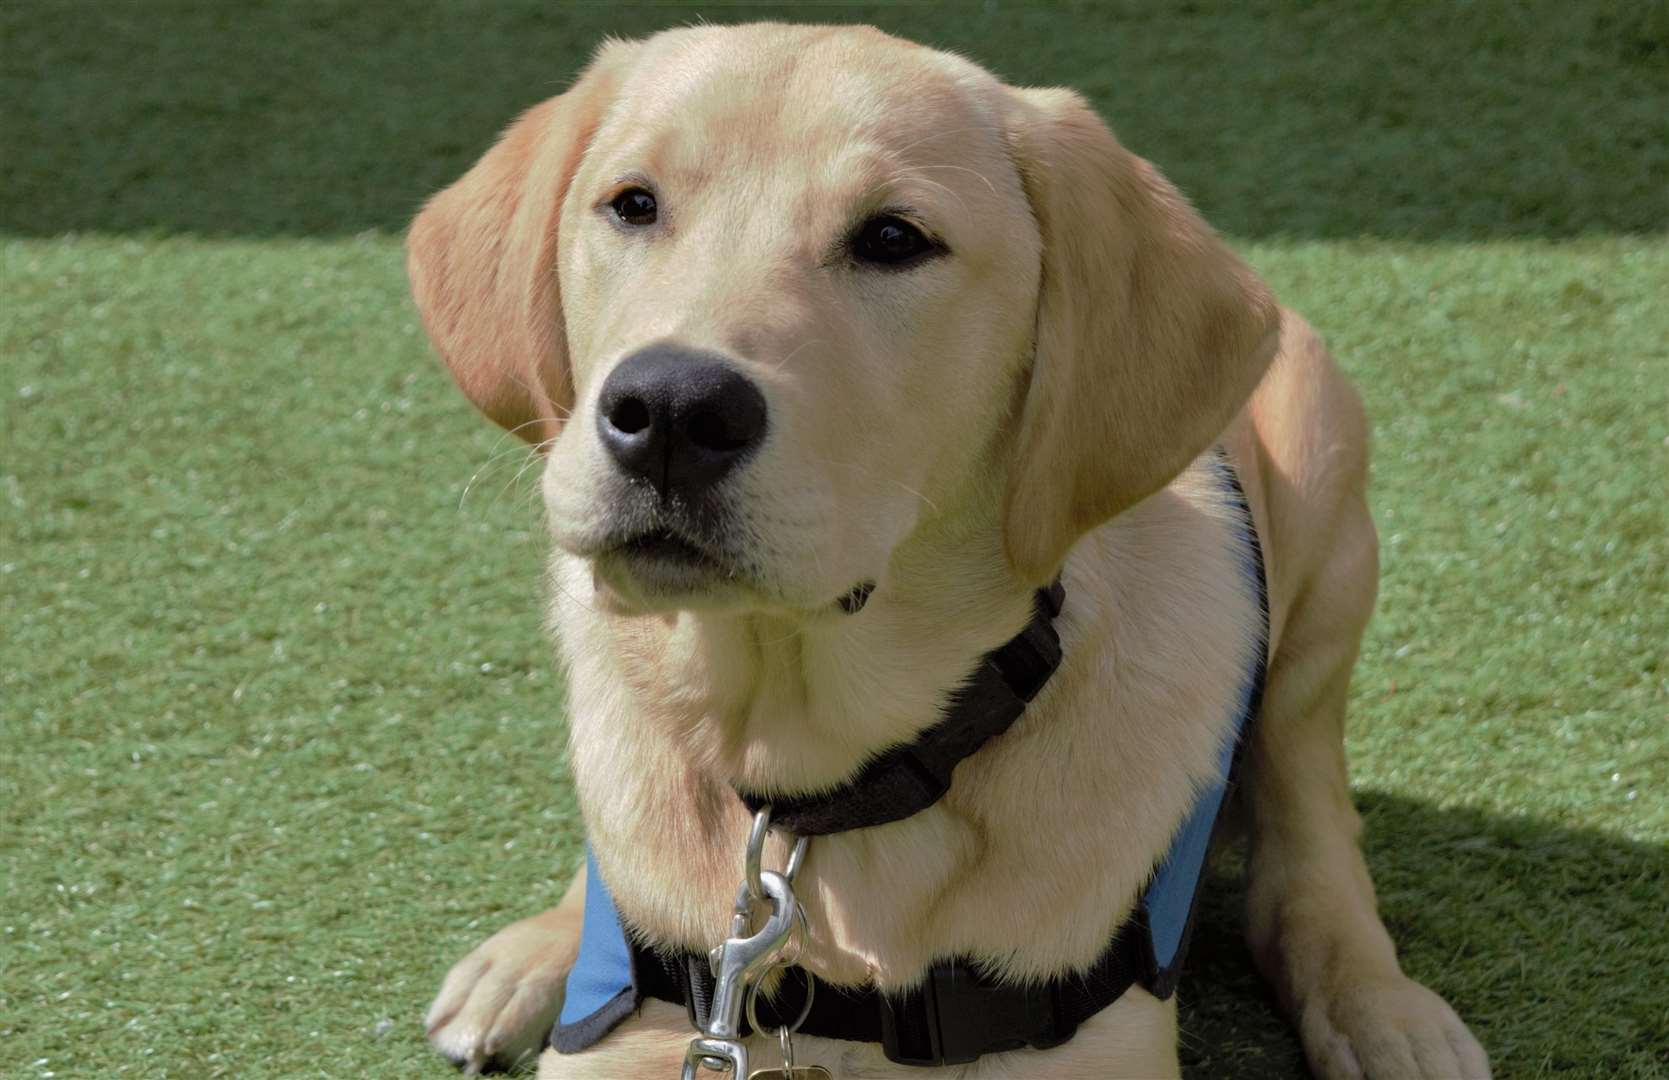 The dog show will be raising money to support guide dogs and their owners